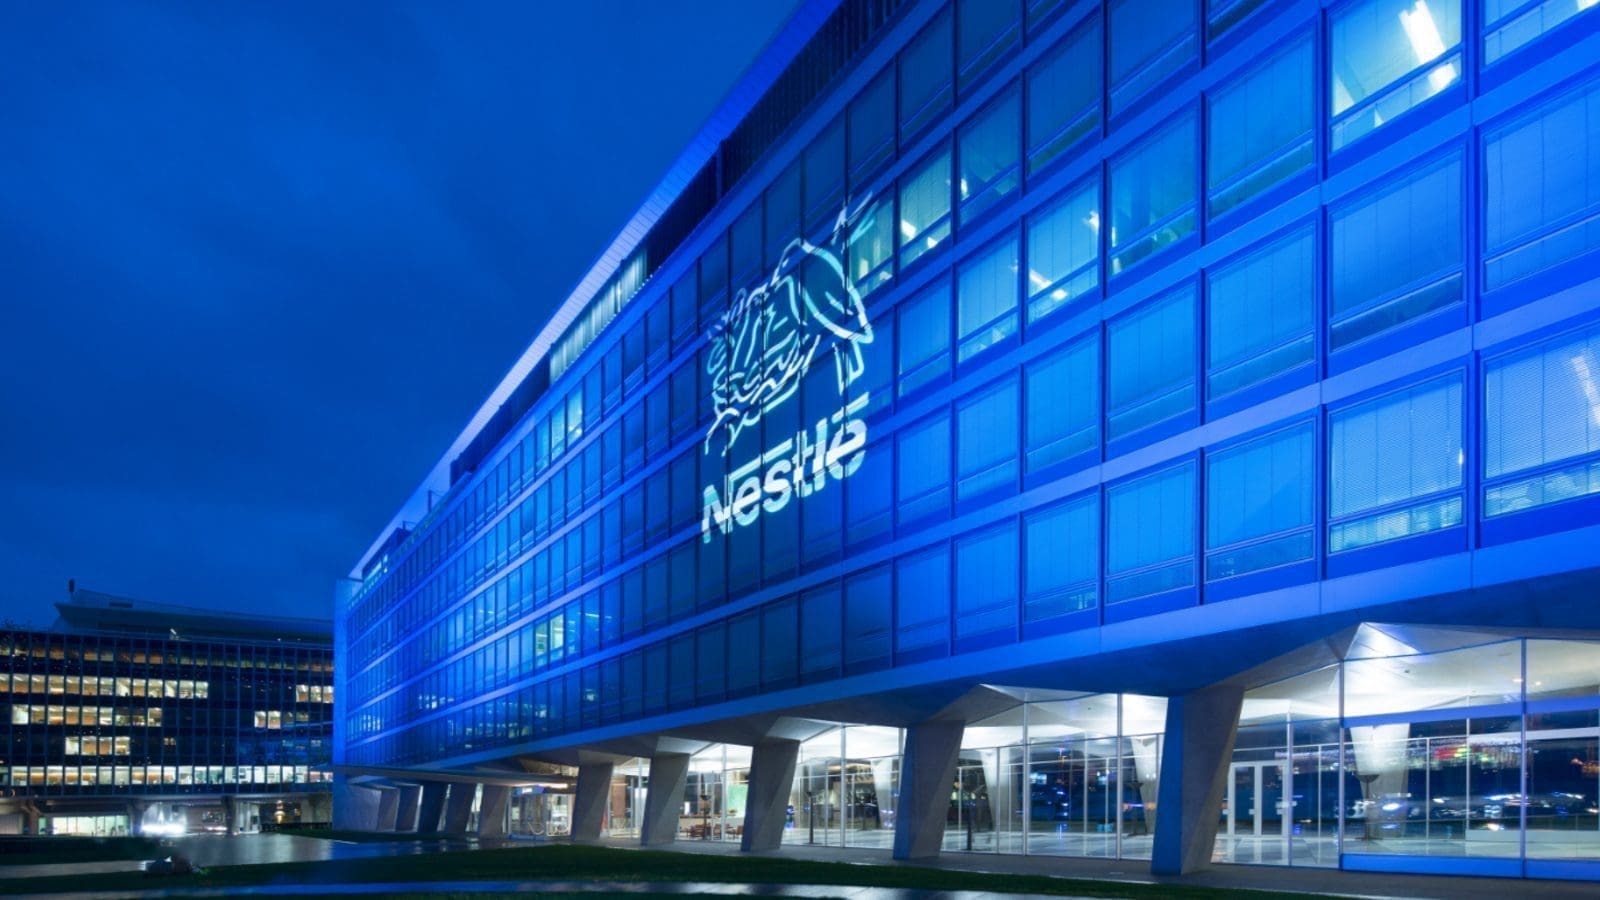 Nestlé creates new geographic zones to better address unique needs of different markets across the globe